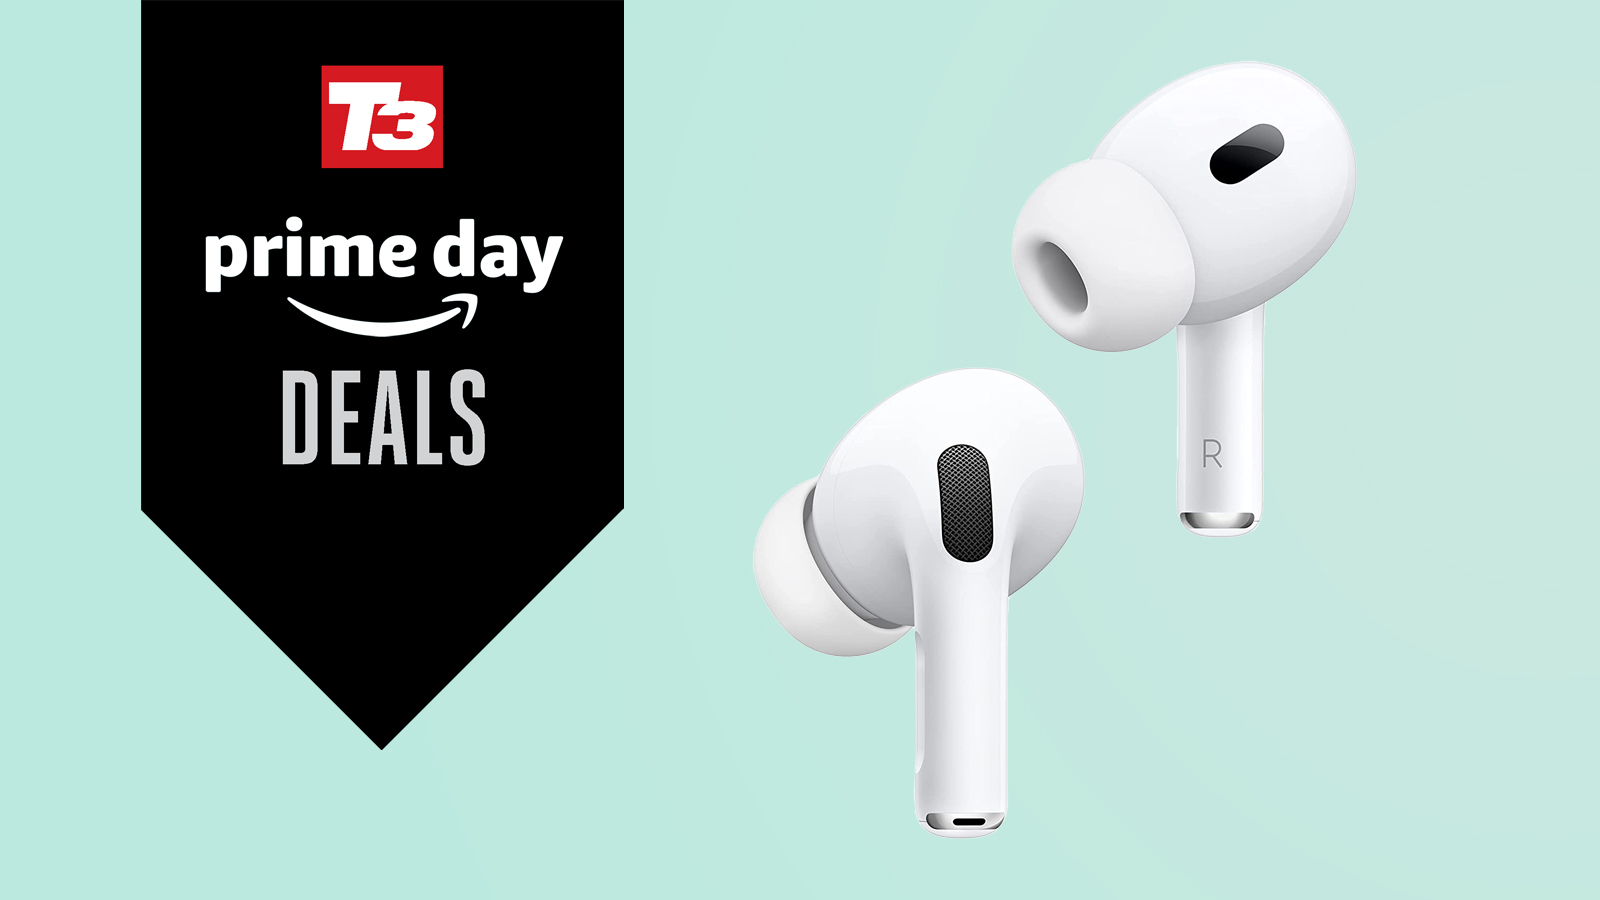 AirPods Pro 2 Black Friday deal: 32% off